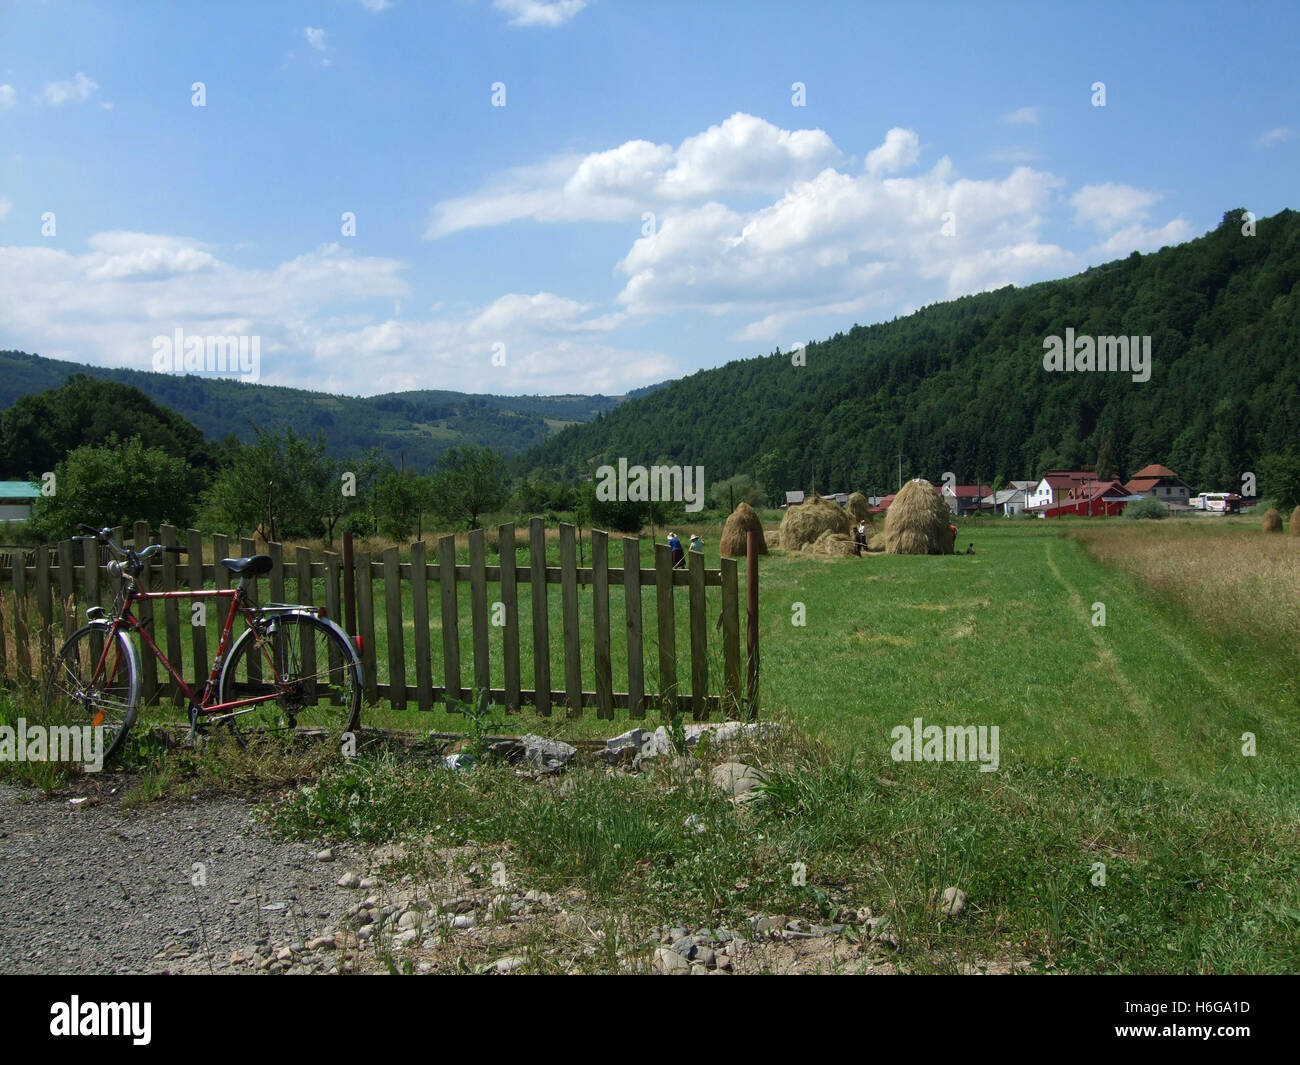 Romanian country side Stock Photo